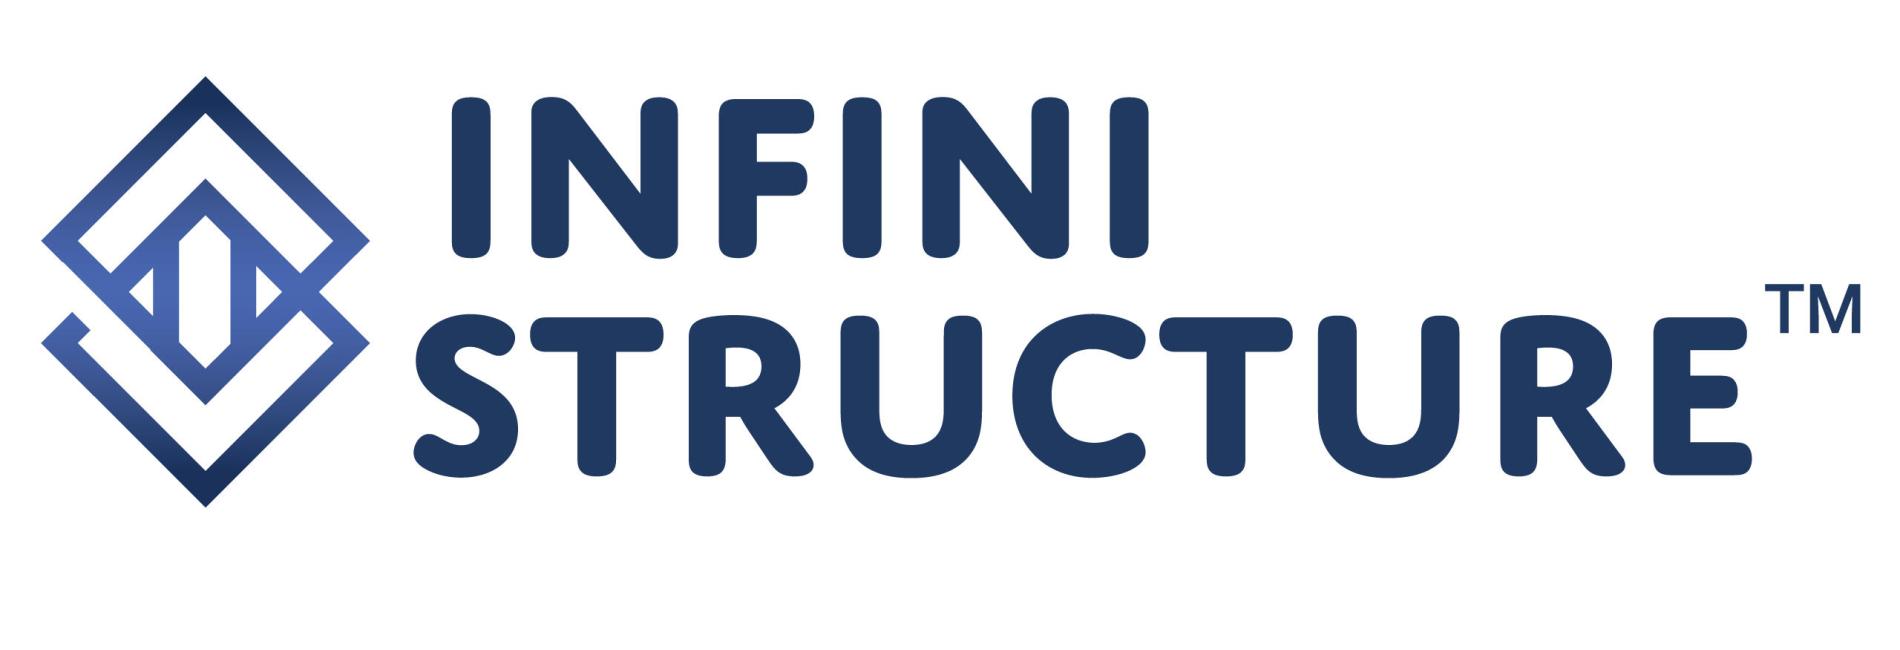 Infinistructure logo - banner